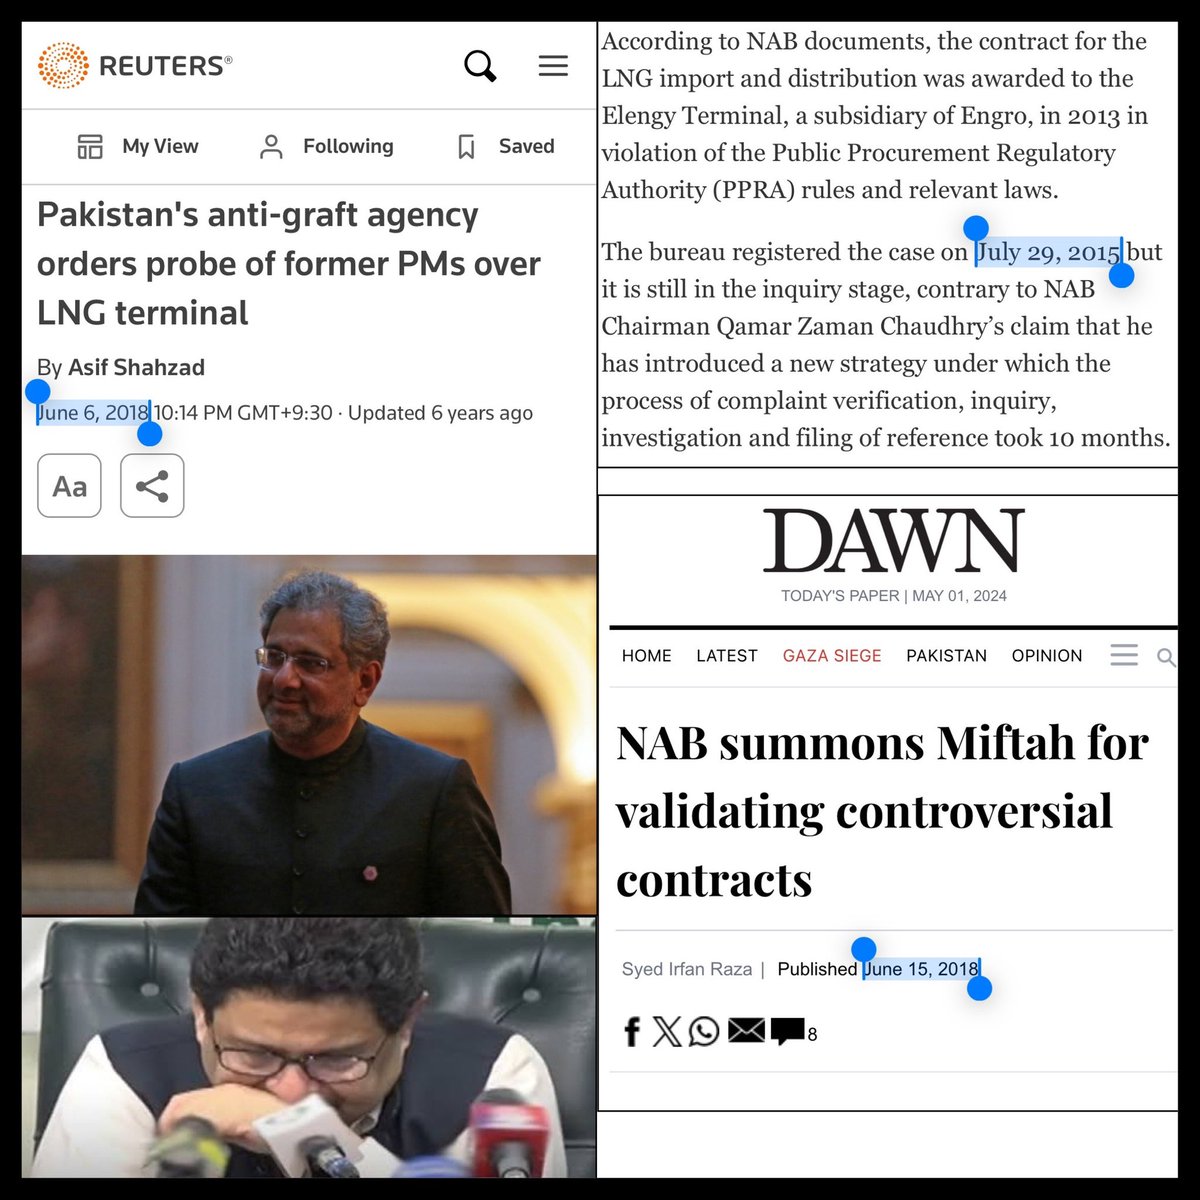 'Intellectual Honest(y) & Moral Courage' 

Miftah himself failed to tell his audience 

LNG Scam inquiry was authorised by NAB Chairman Qamar Zaman under Nawaz Sharif govt on 29th July 2015, reopened in June 2018 by caretaker government. 

@ImranKhanPTI had nothing to do with it